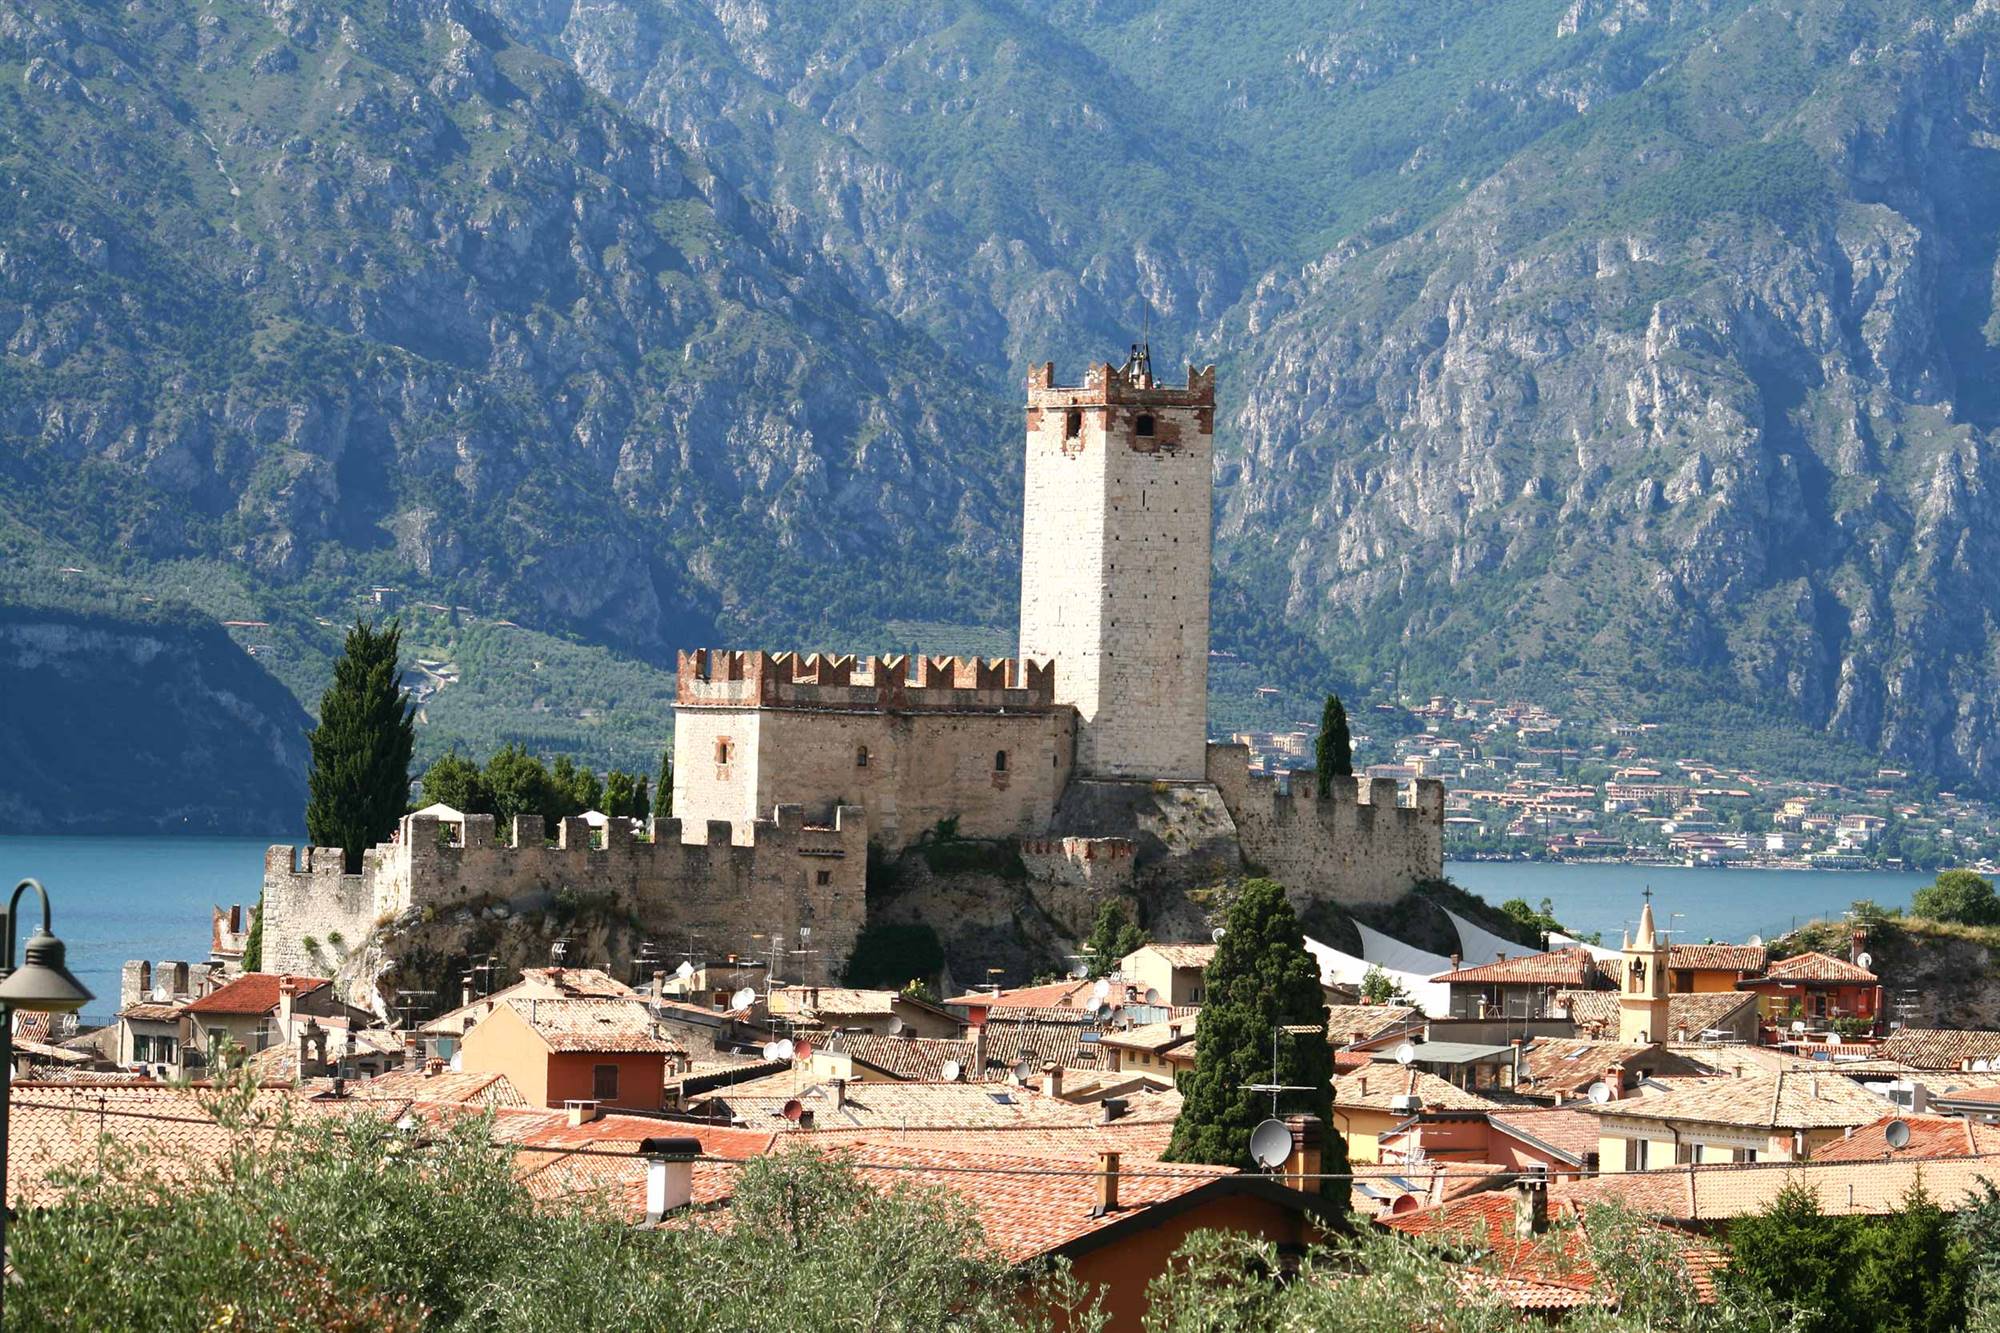 Guided tour of the village and the Castello di Malcesine